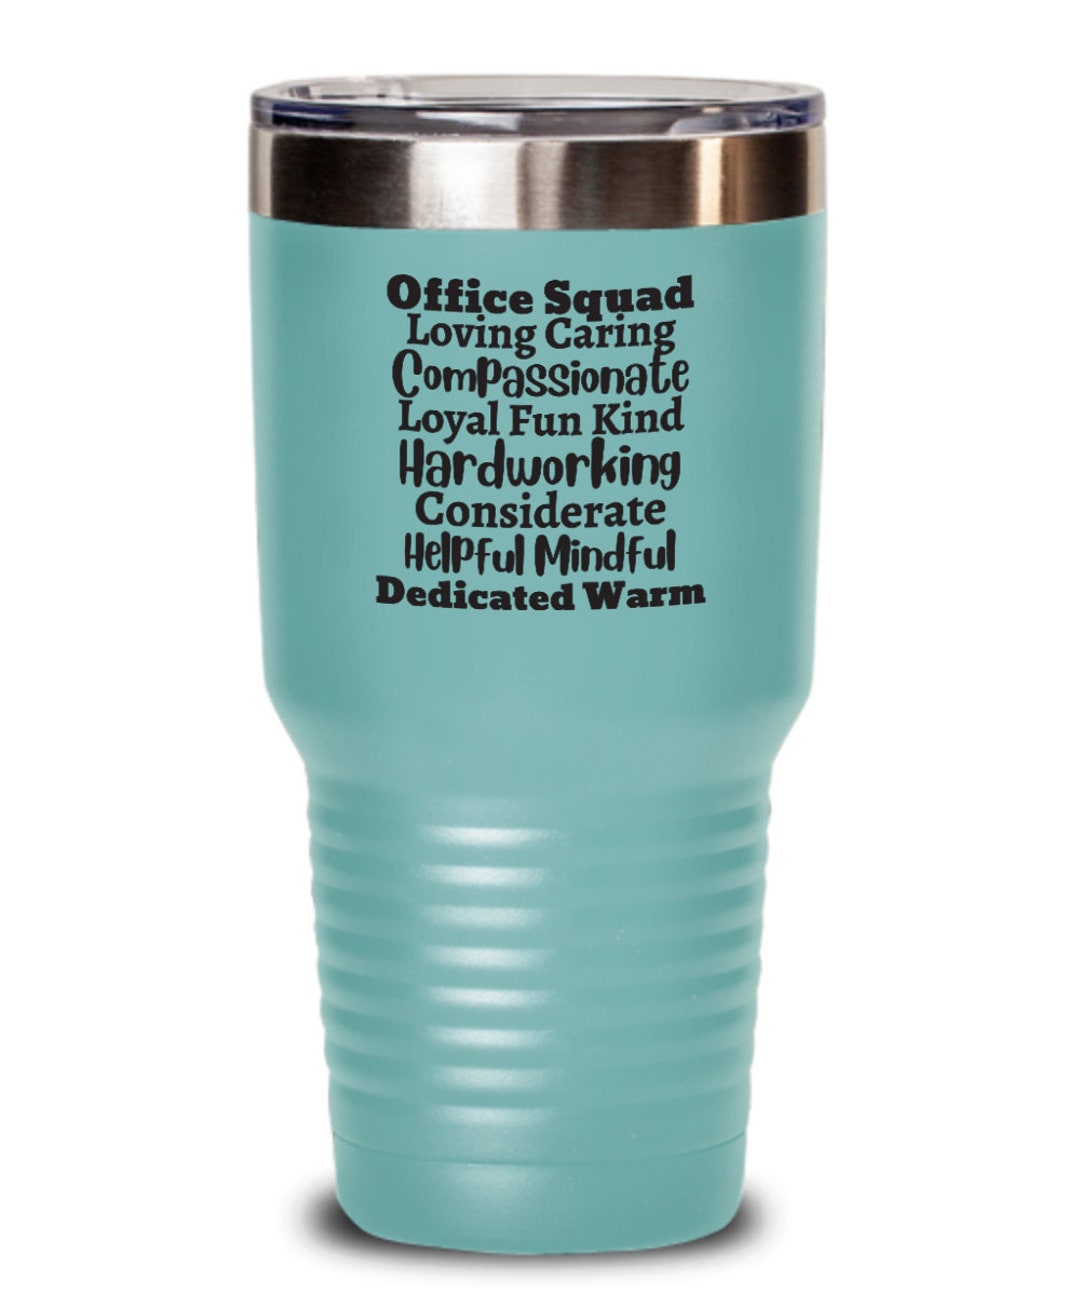 Dumbfuckery Tumbler, Funny Tumbler For Work Coworker Gift, Hot Cold Tumbler  30oz